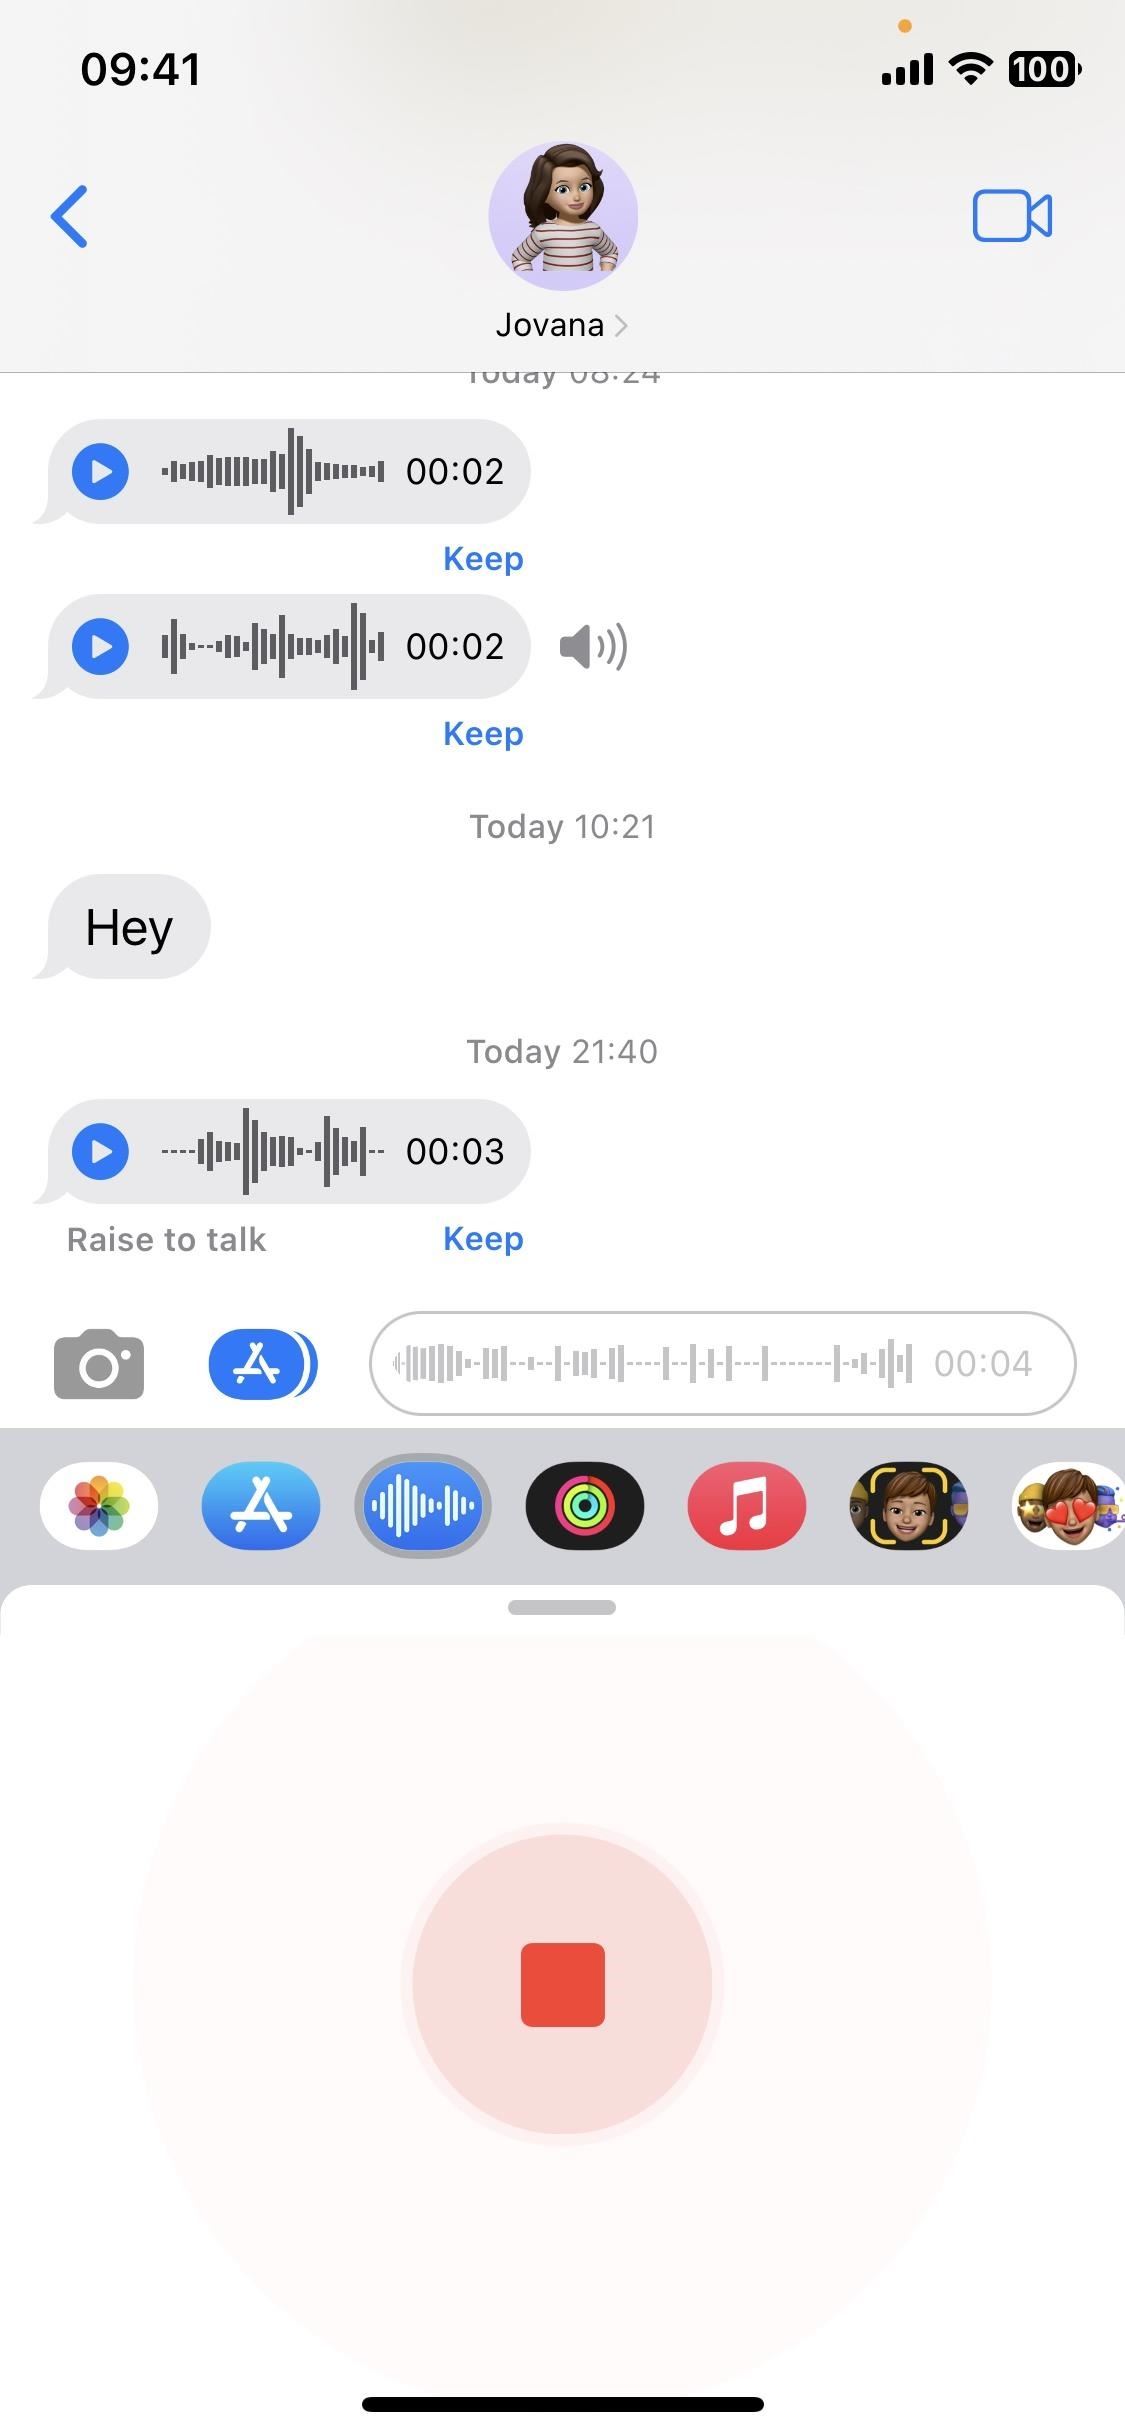 iOS 16 Changes How You Record and Send Audio Messages on Your iPhone — Here's How It Works Now